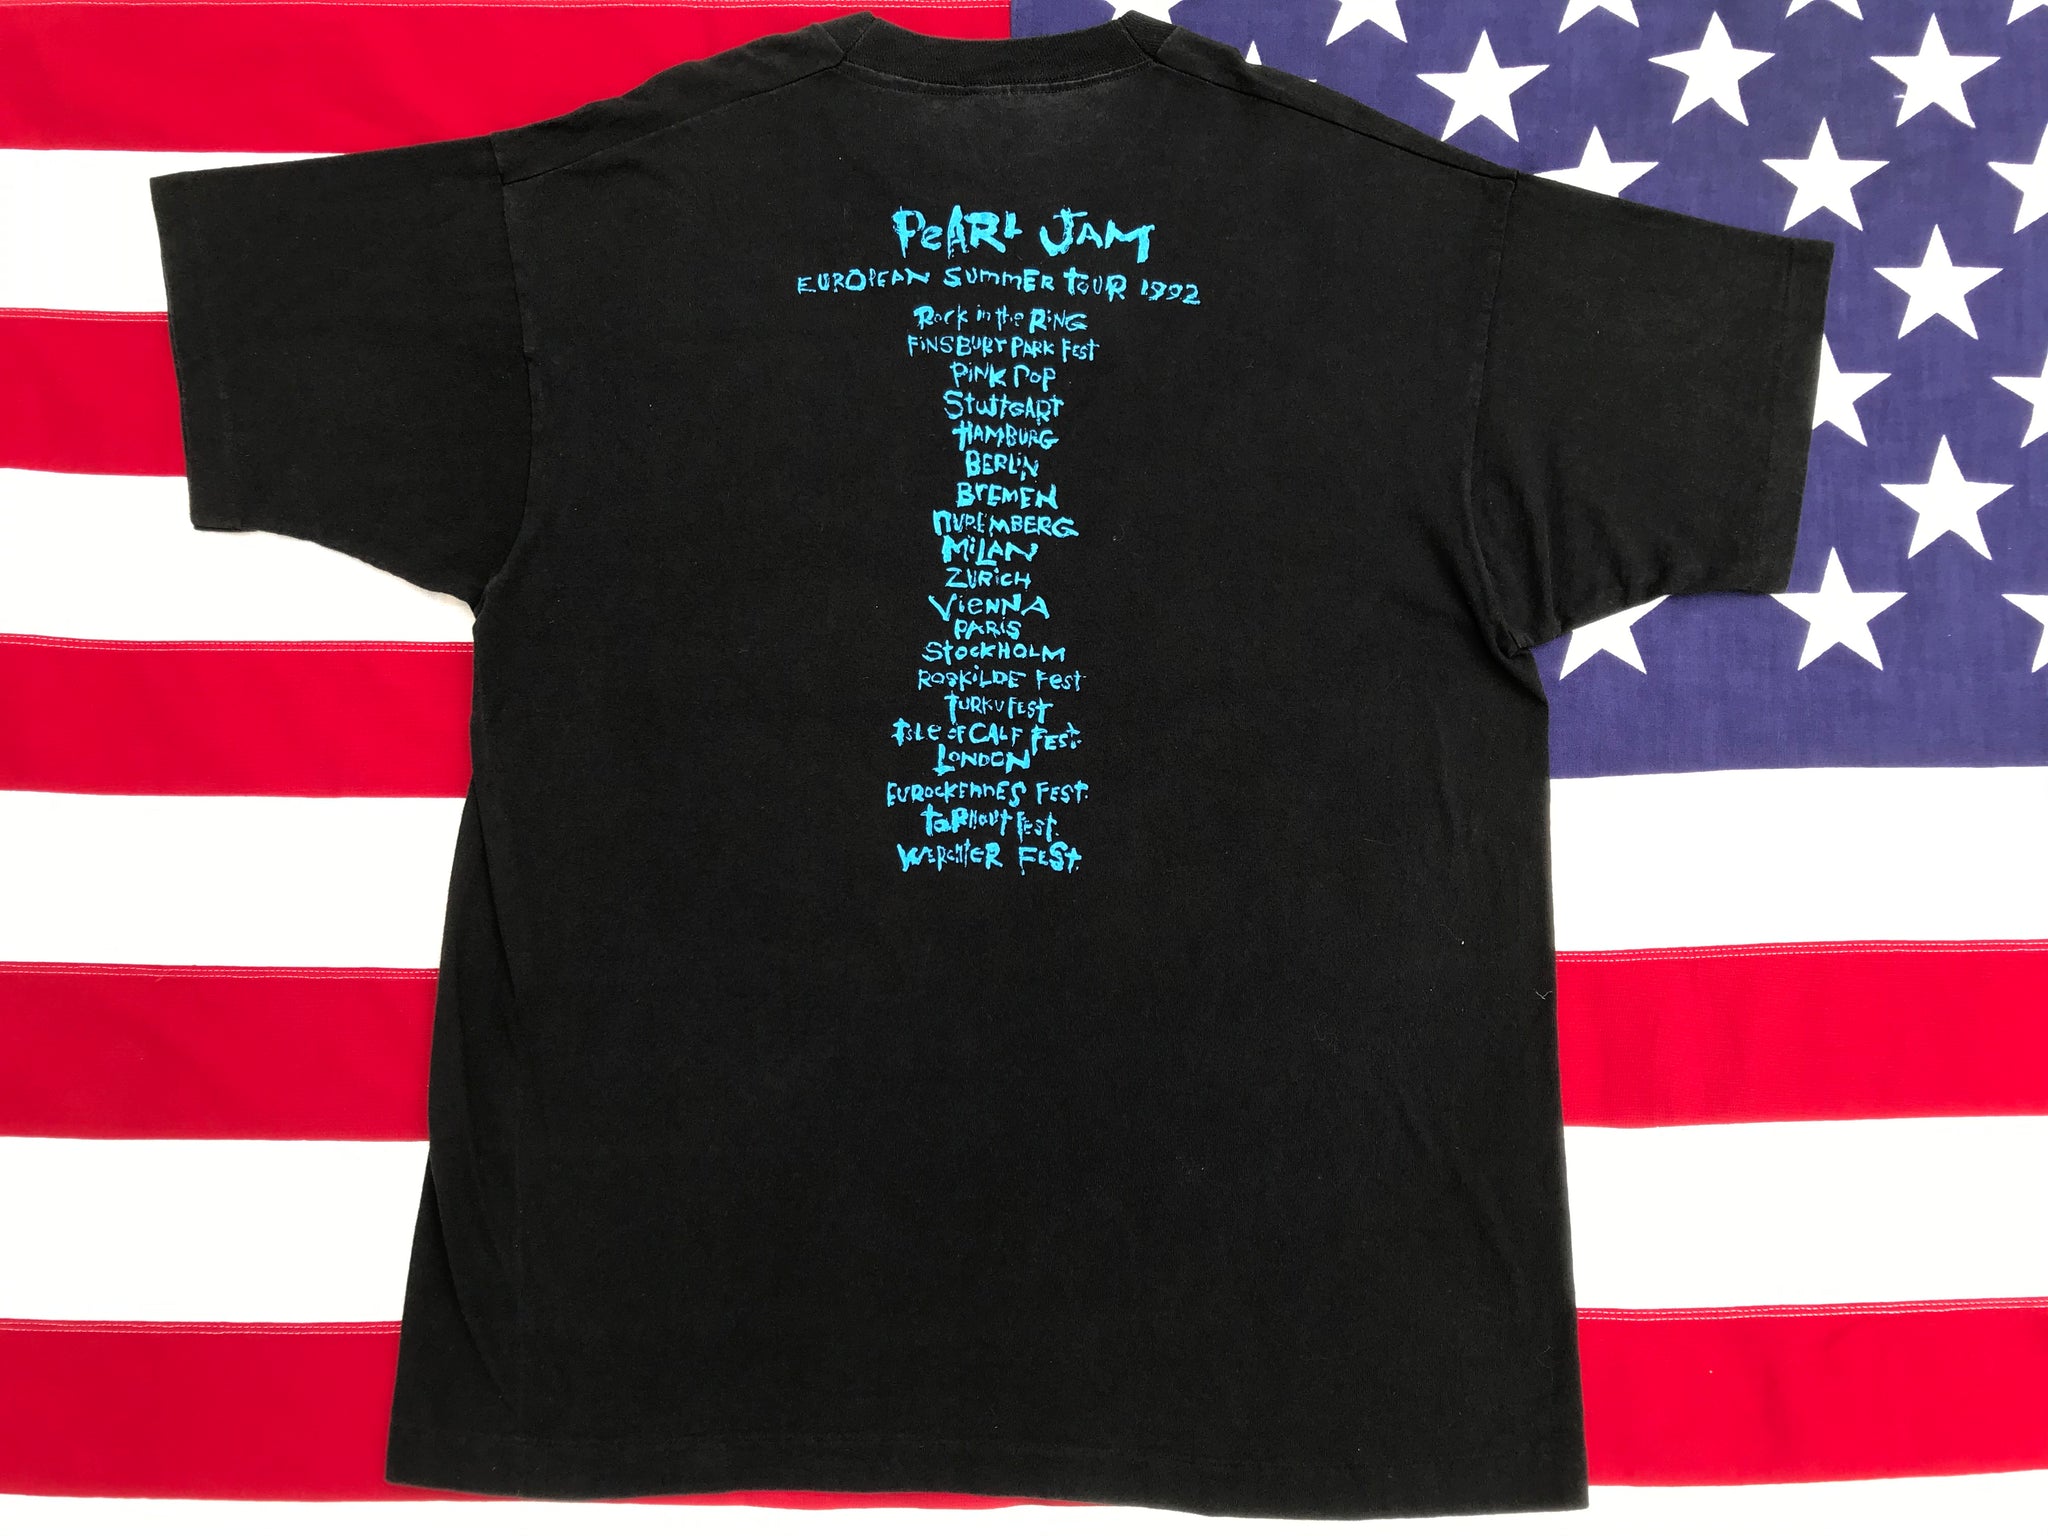 Pearl Jam RARE European Summer Tour 1992 Original Vintage Rock T-Shirt by Fruit of The Loom Made in USA